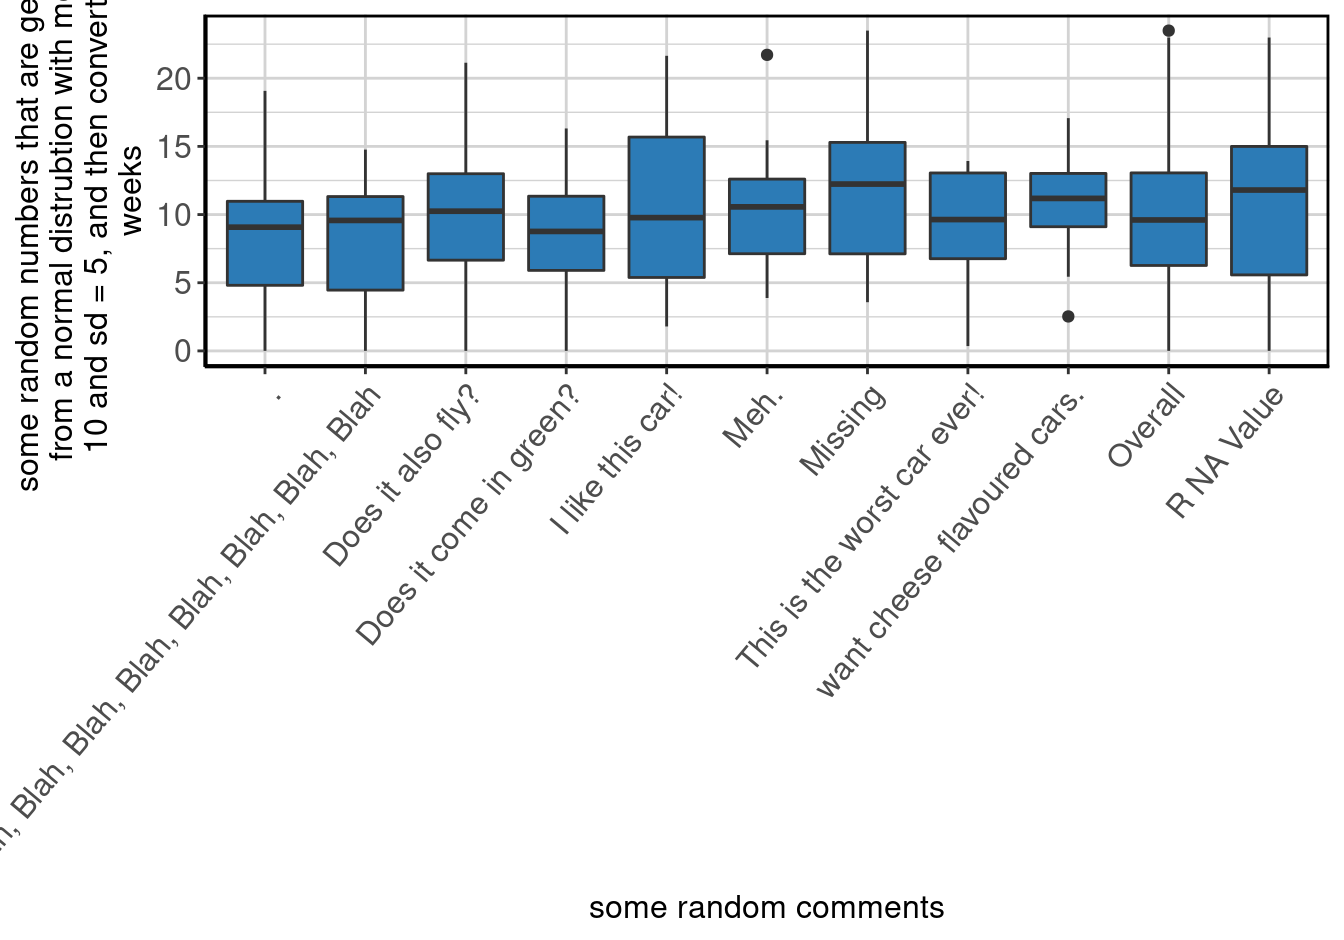 Boxplot of <b>some random numbers that are generated from a normal distrubtion with mean = 10 and sd = 5, and then converted to weeks</b> by <b>some random comments</b>.